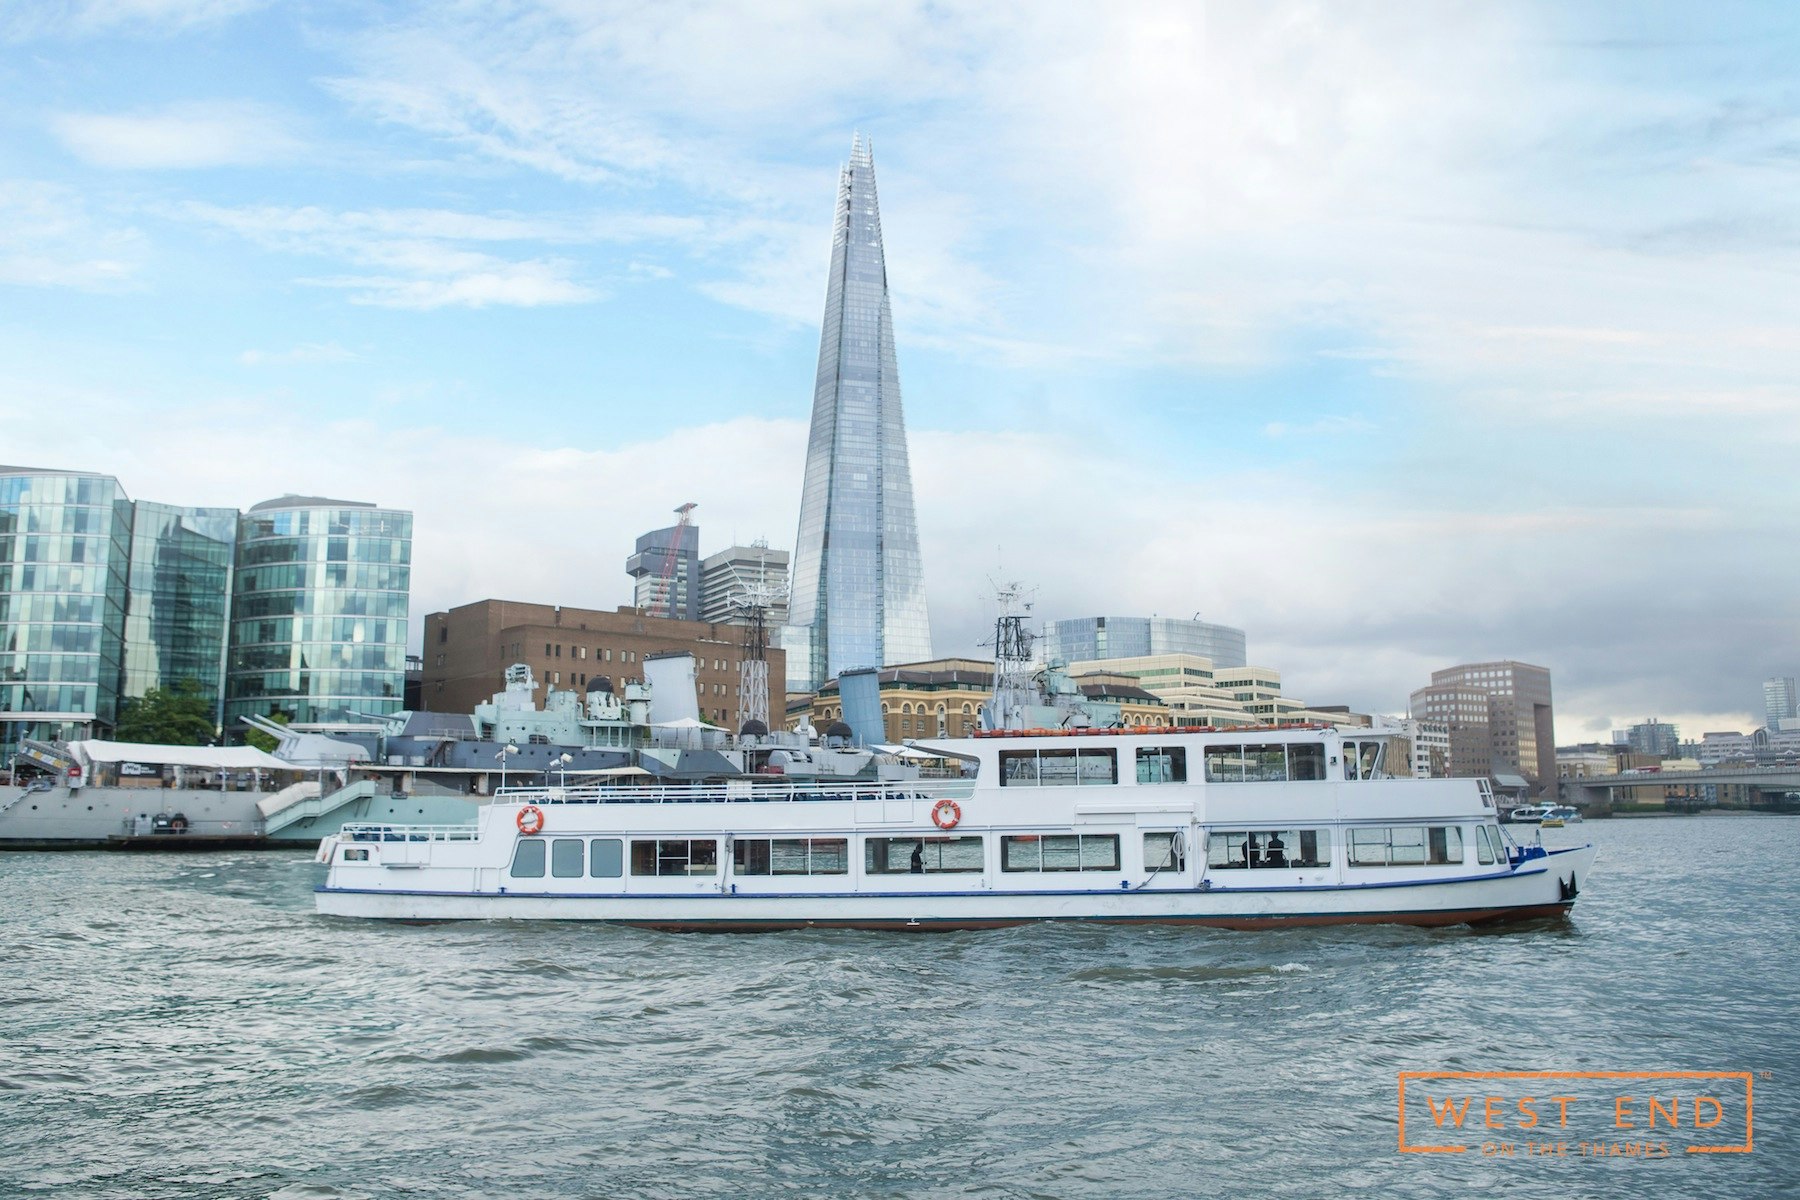 West End on the Thames - The Vessel image 1